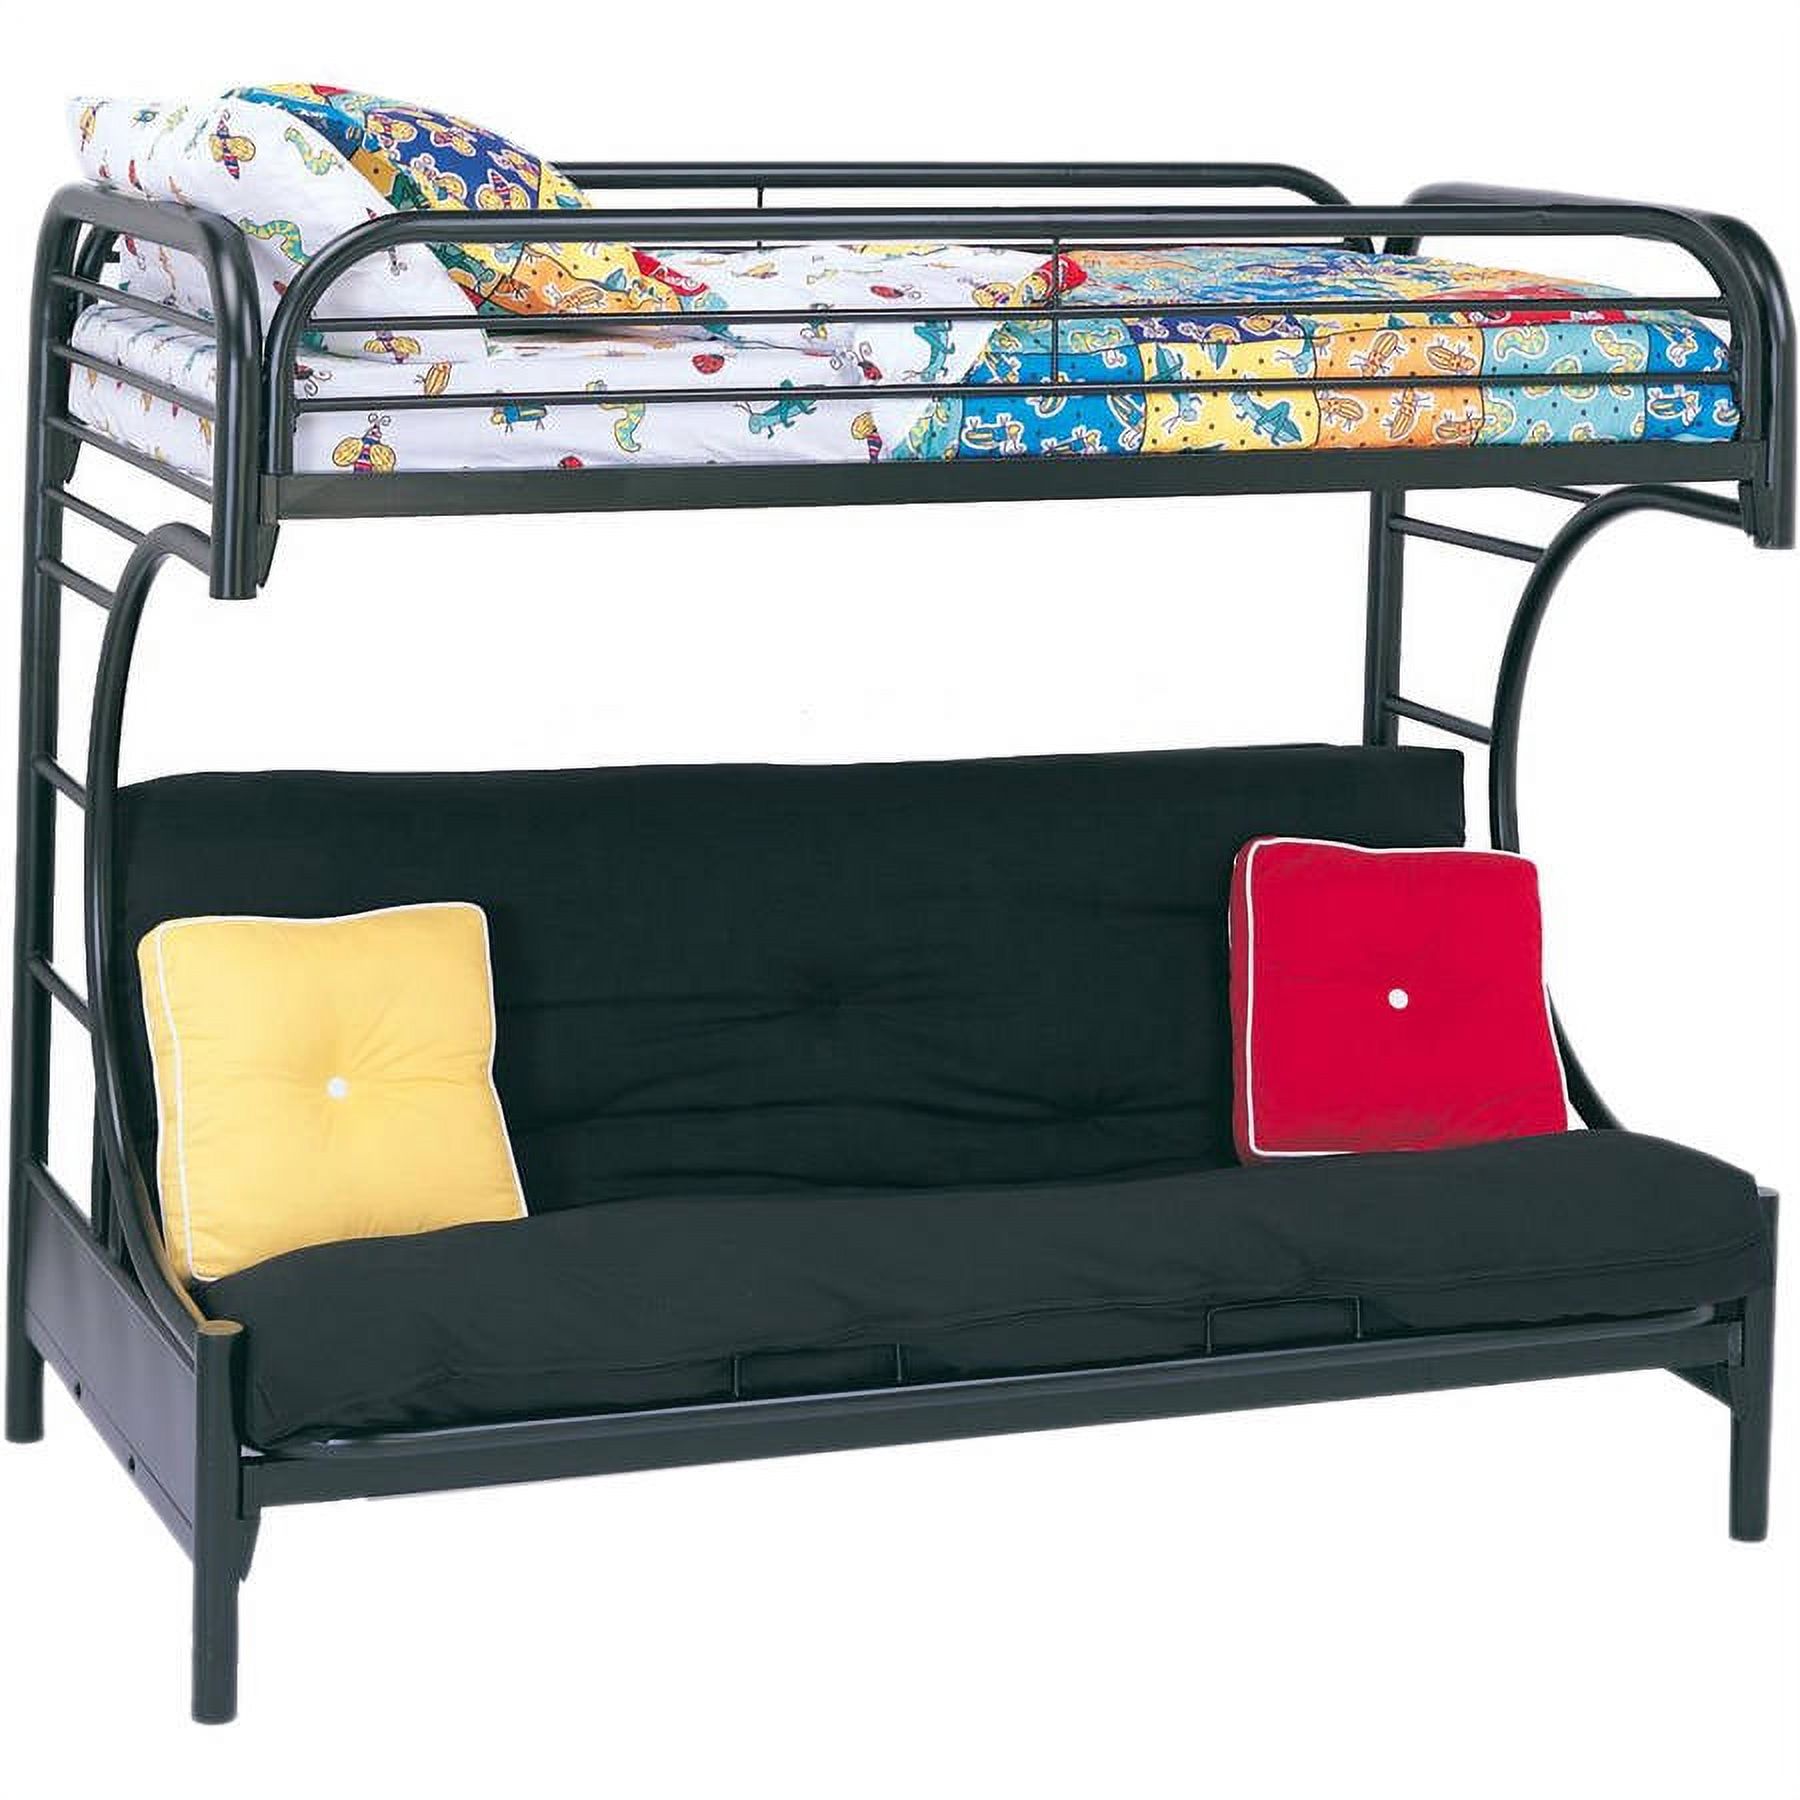 Acme Furniture Eclipse Twin over Full Futon Bunk Bed, Black - image 2 of 6